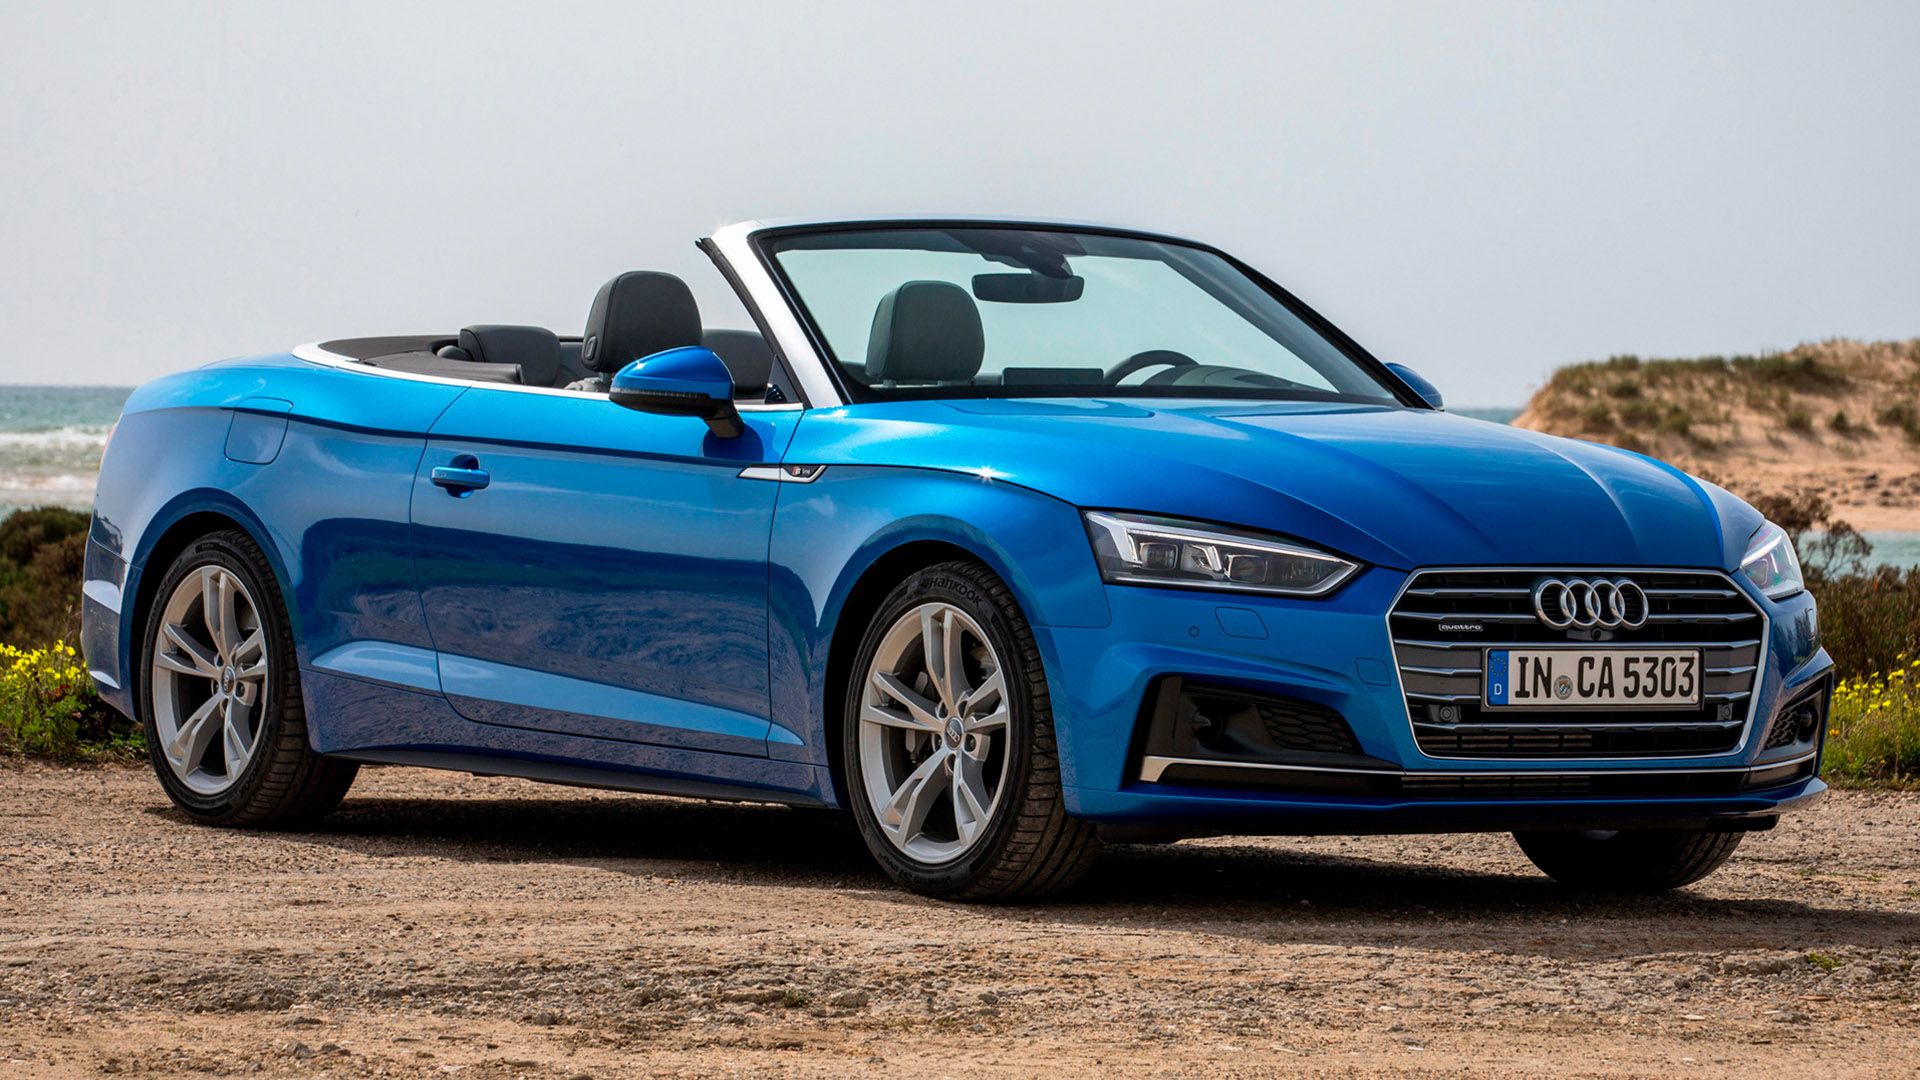 Blue Audi A5 convertible with open top stands on a cliff by the sea on sandy ground